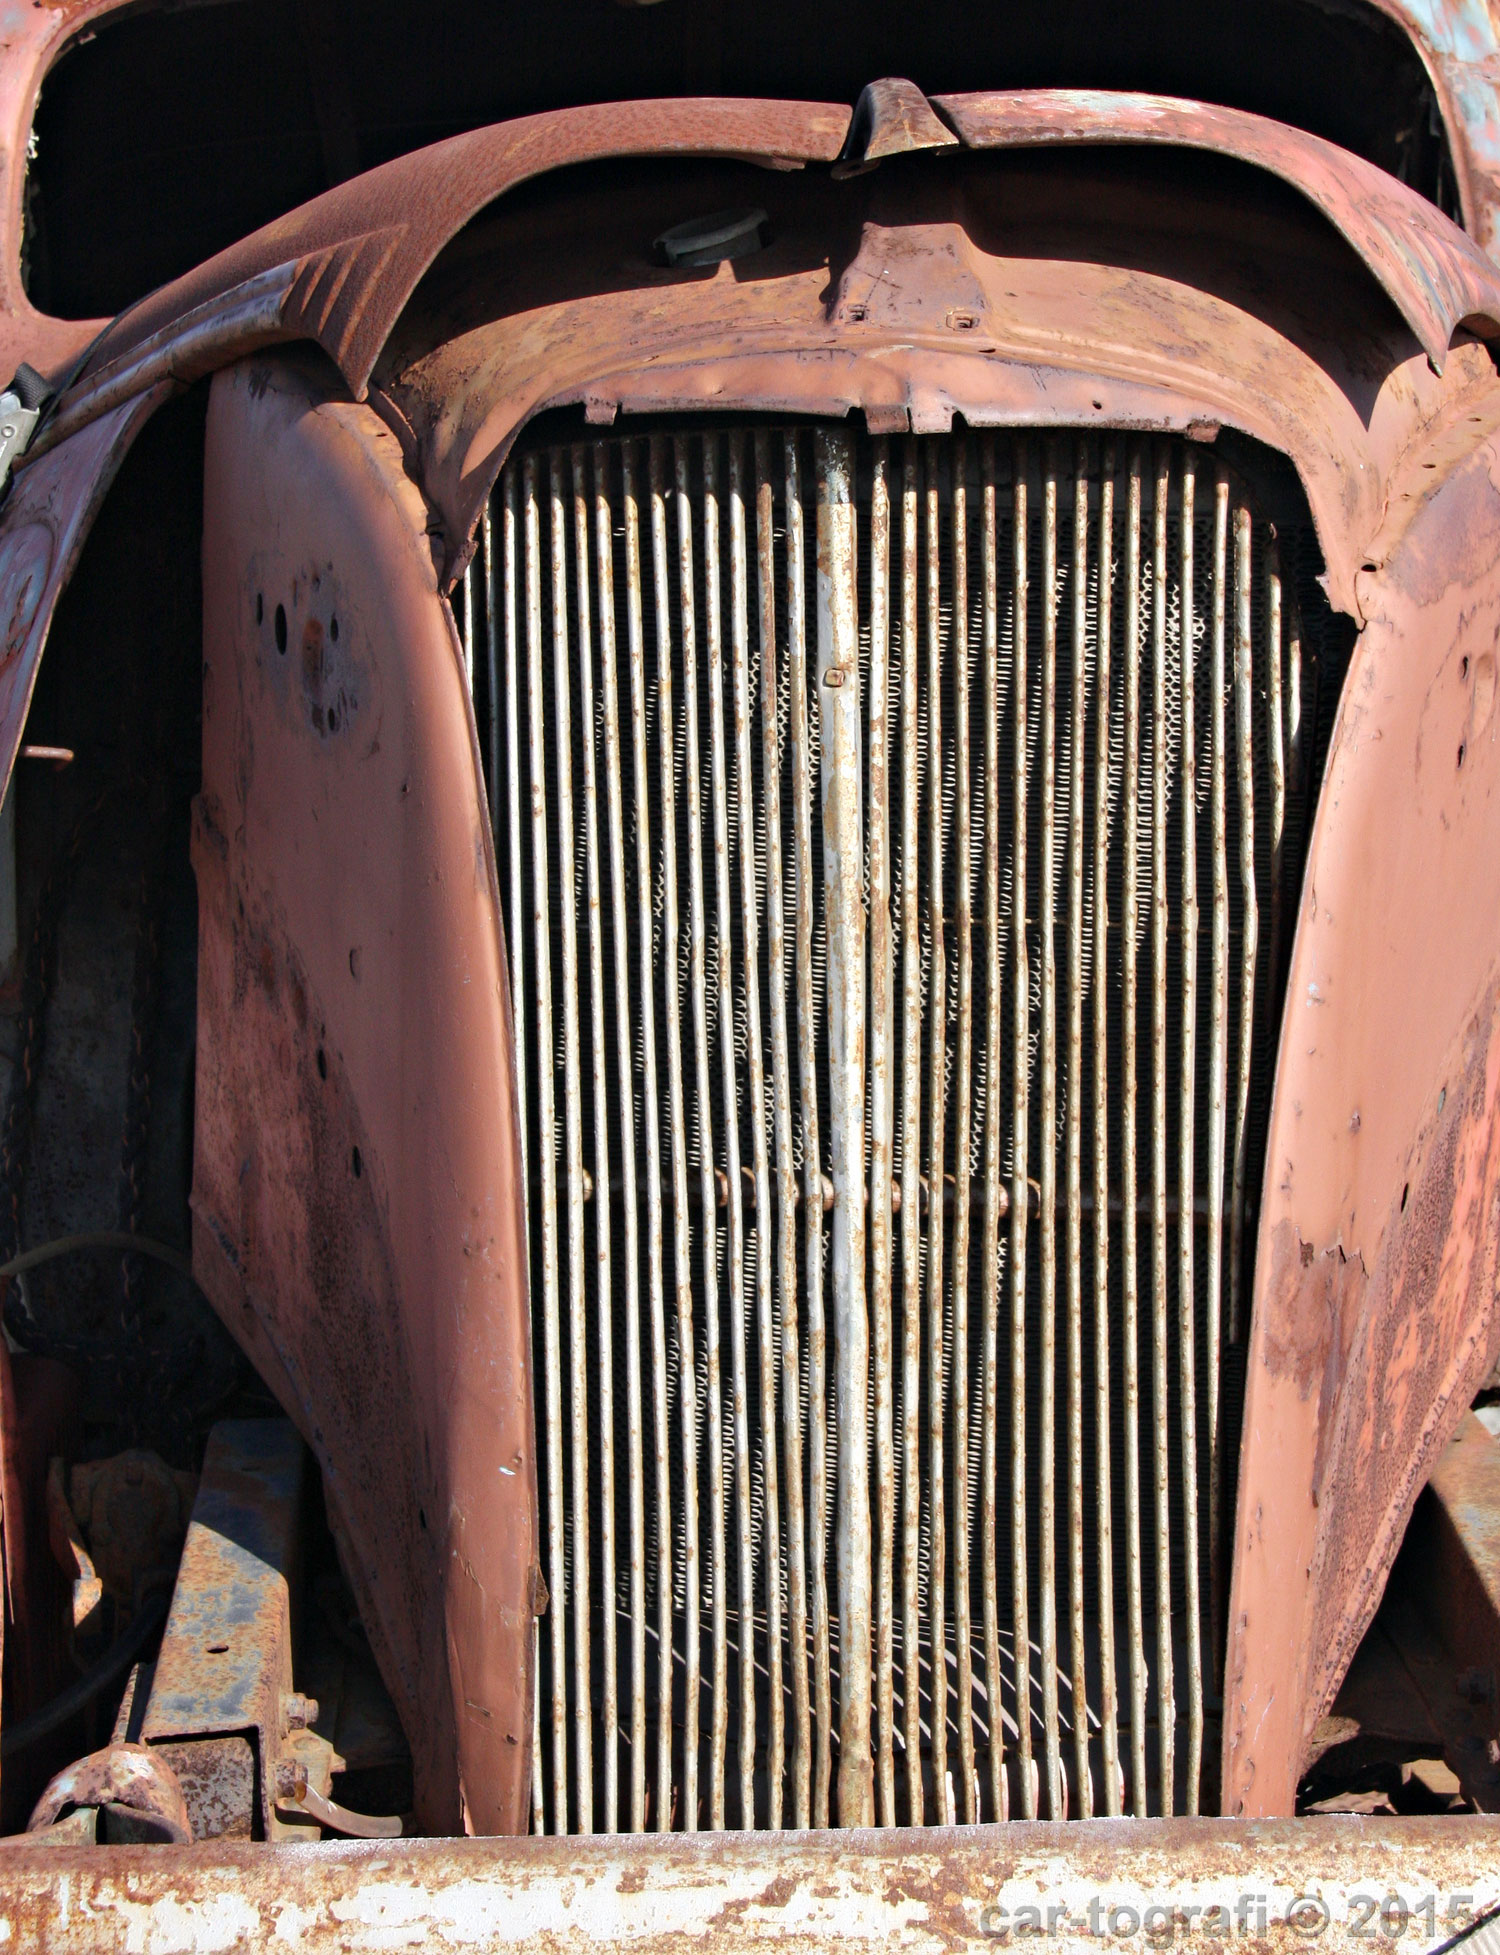 Rust is part of the life of a classic car.